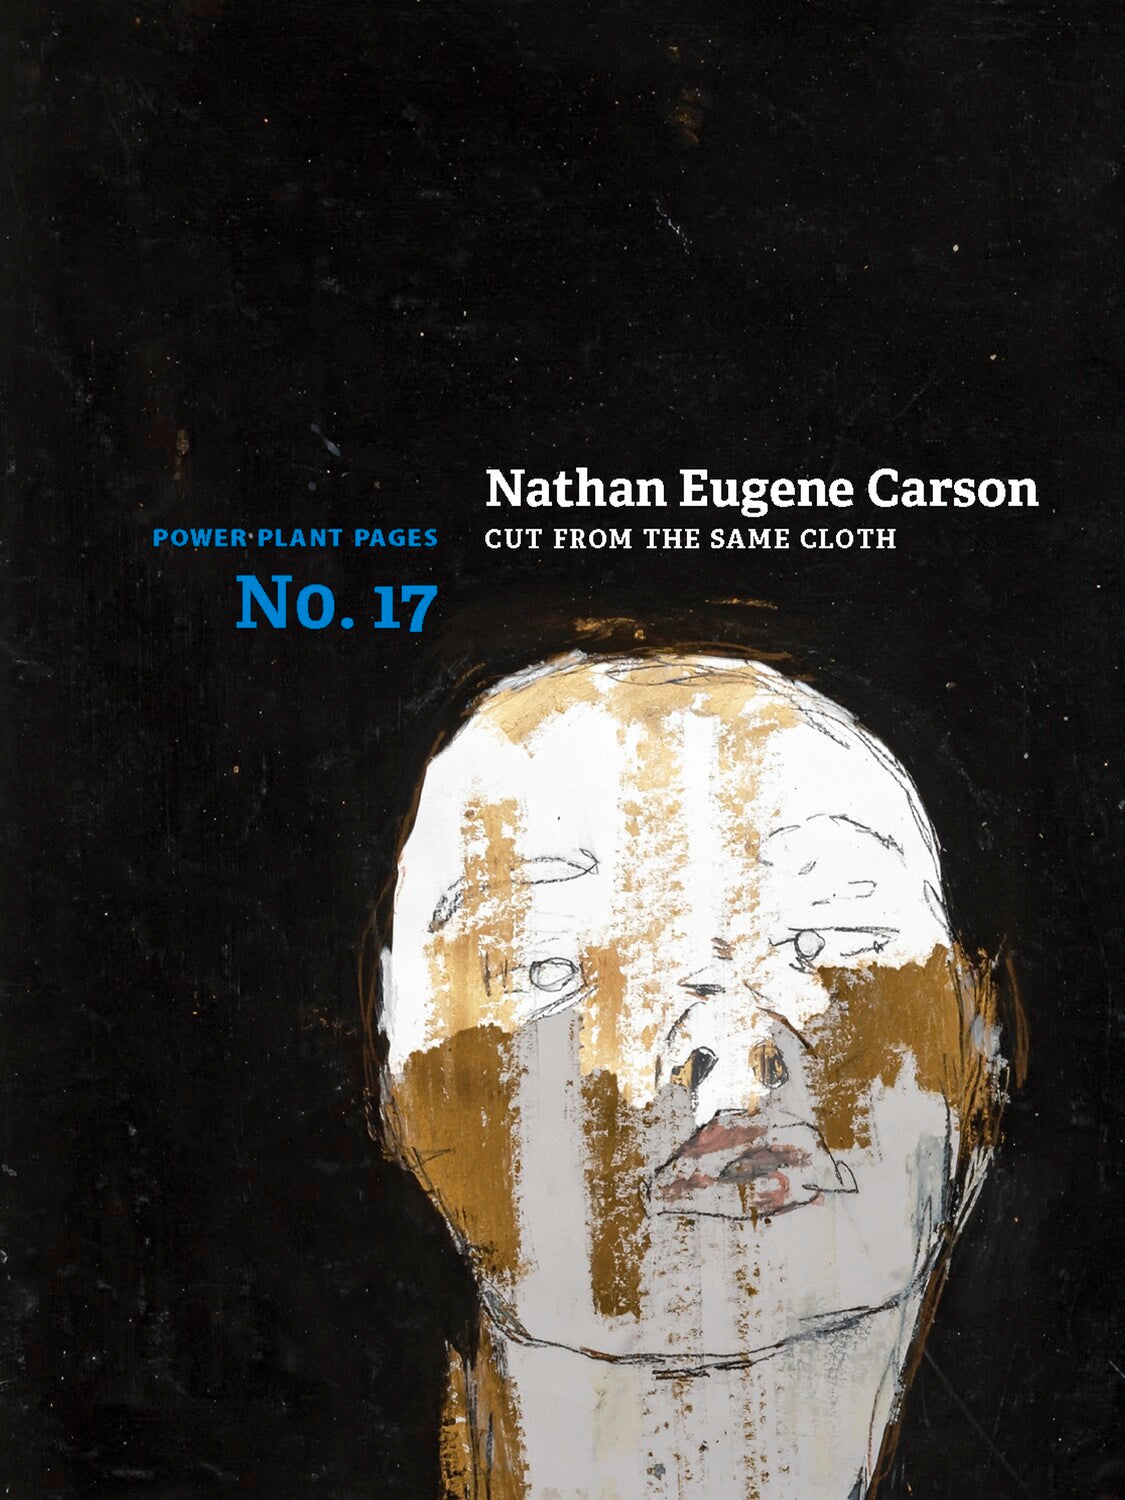 Nathan Eugene Carson: Cut from the same cloth